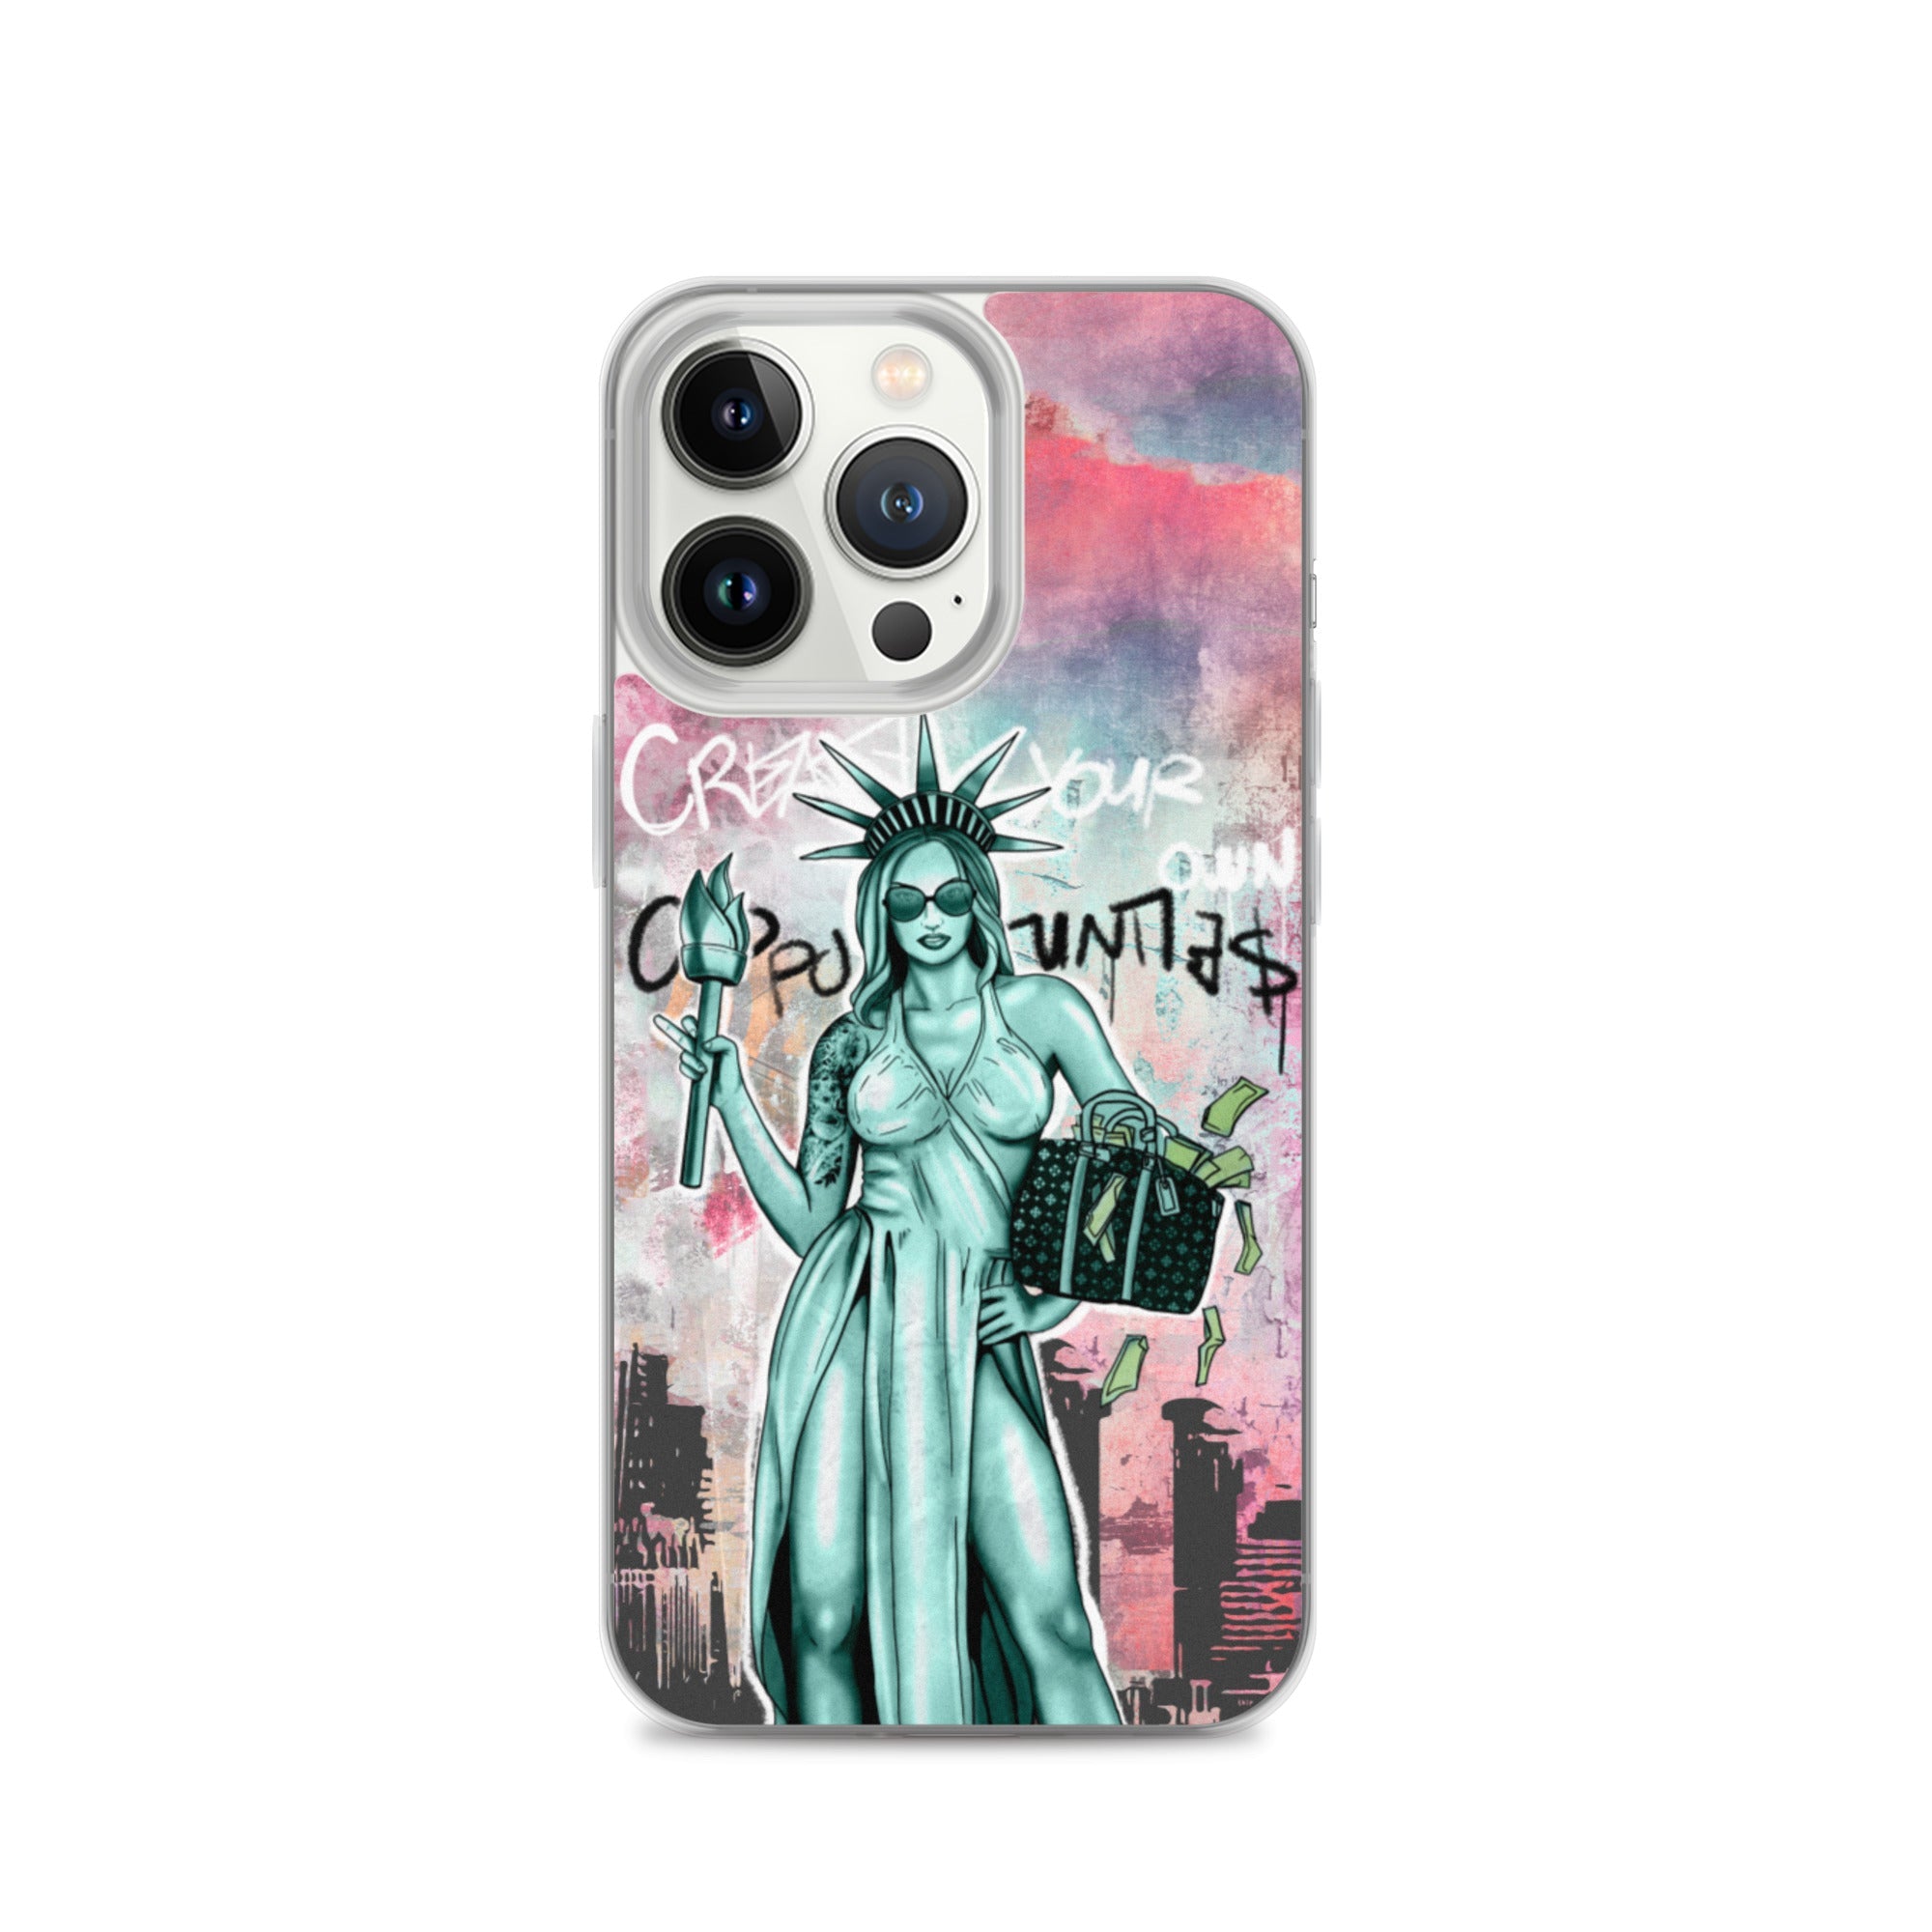 Create Your Own Opportunities iPhone Case - REBHORN DESIGN